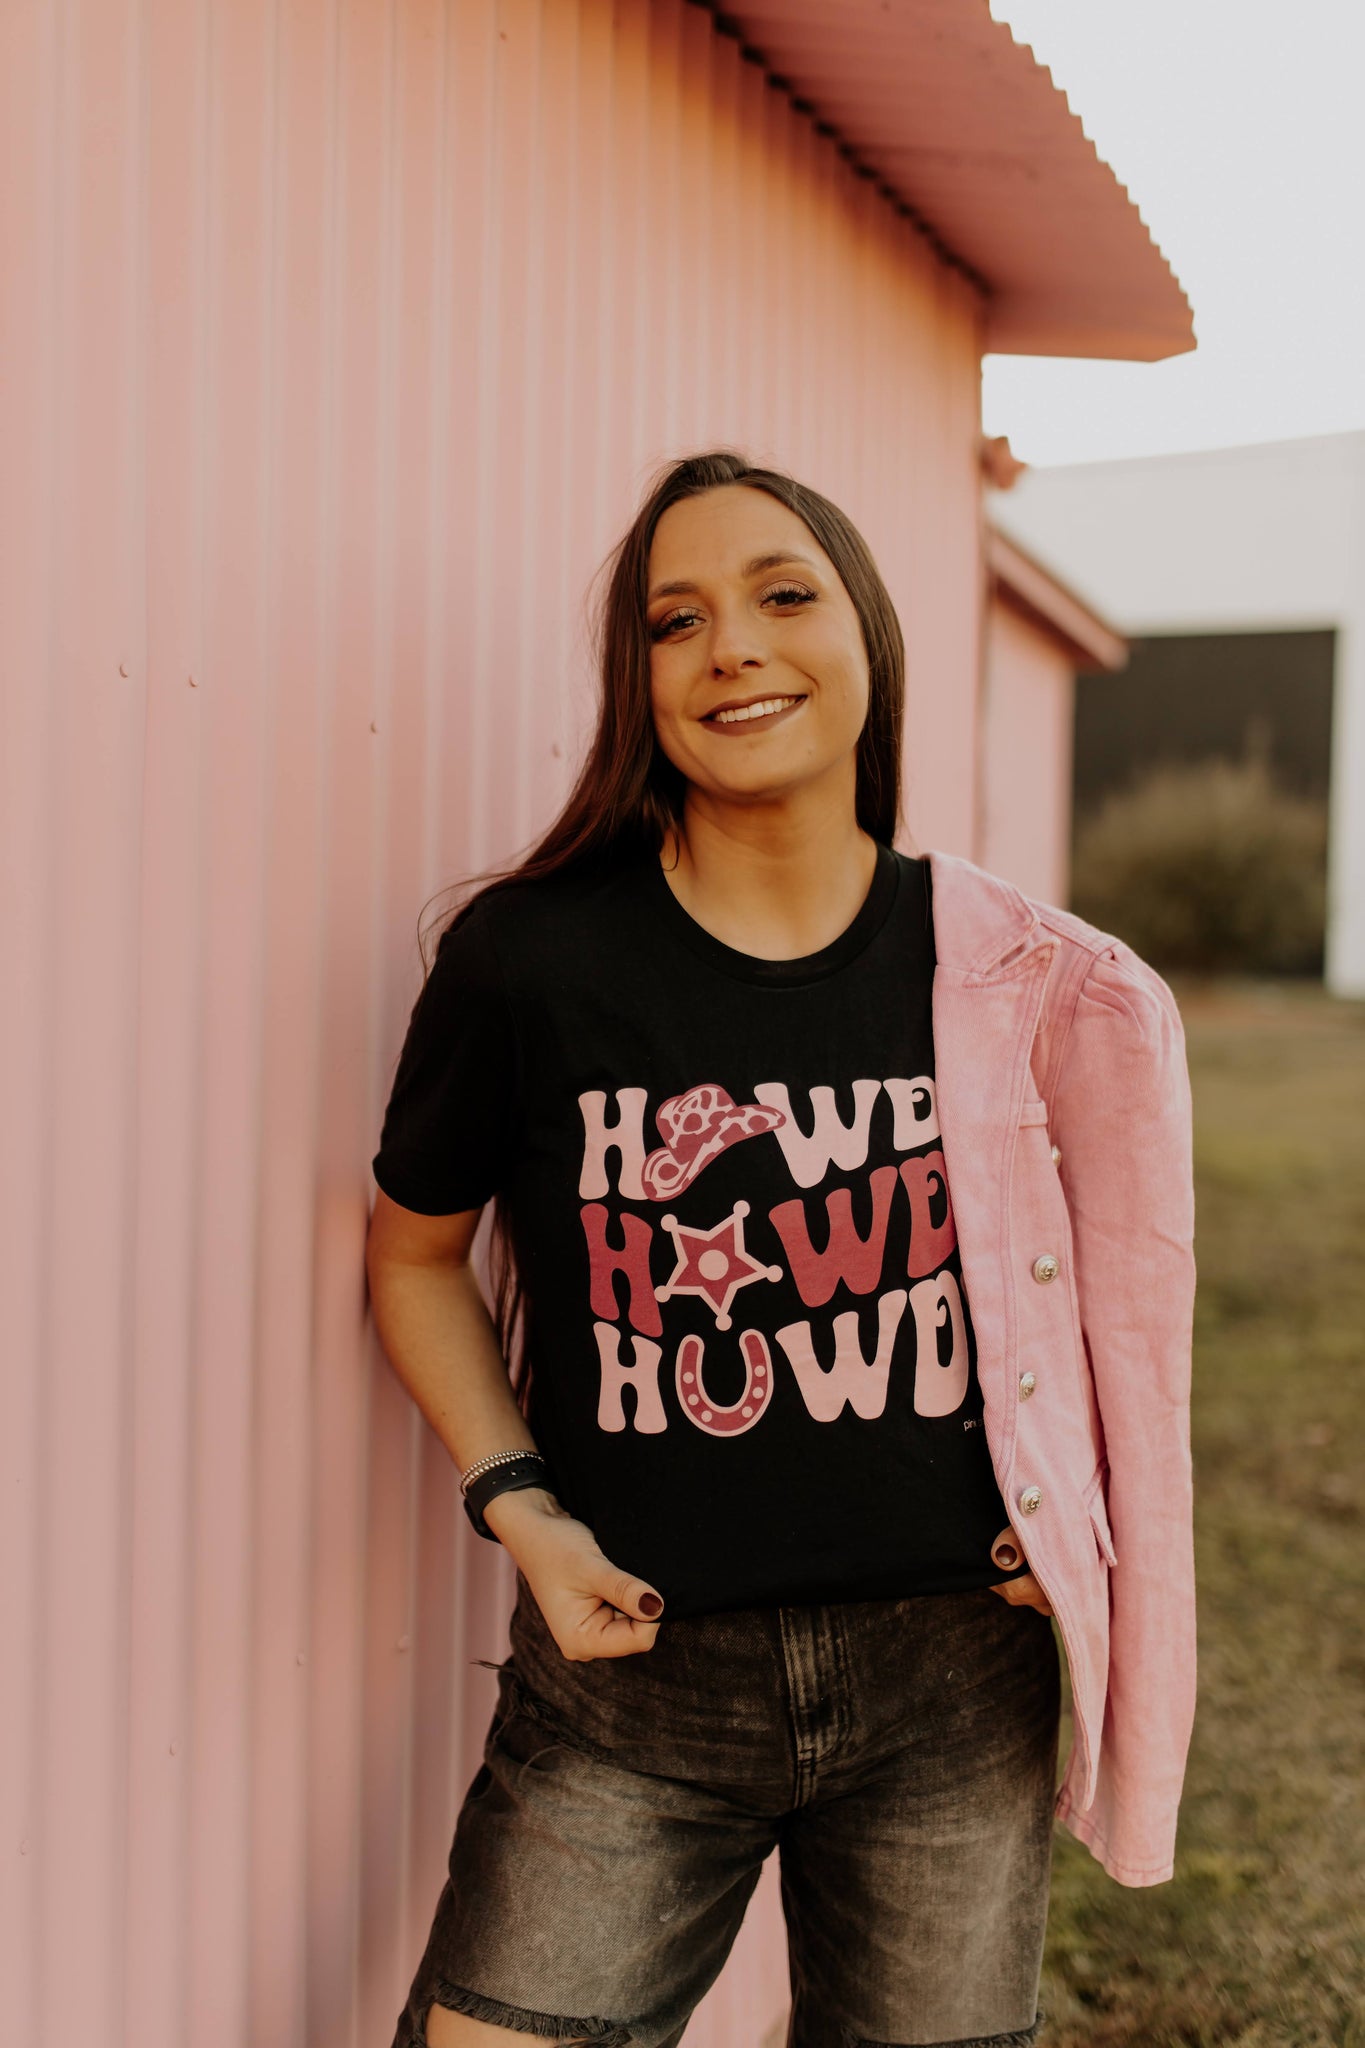 Howdy Howdy Howdy Pink Graphic Tee